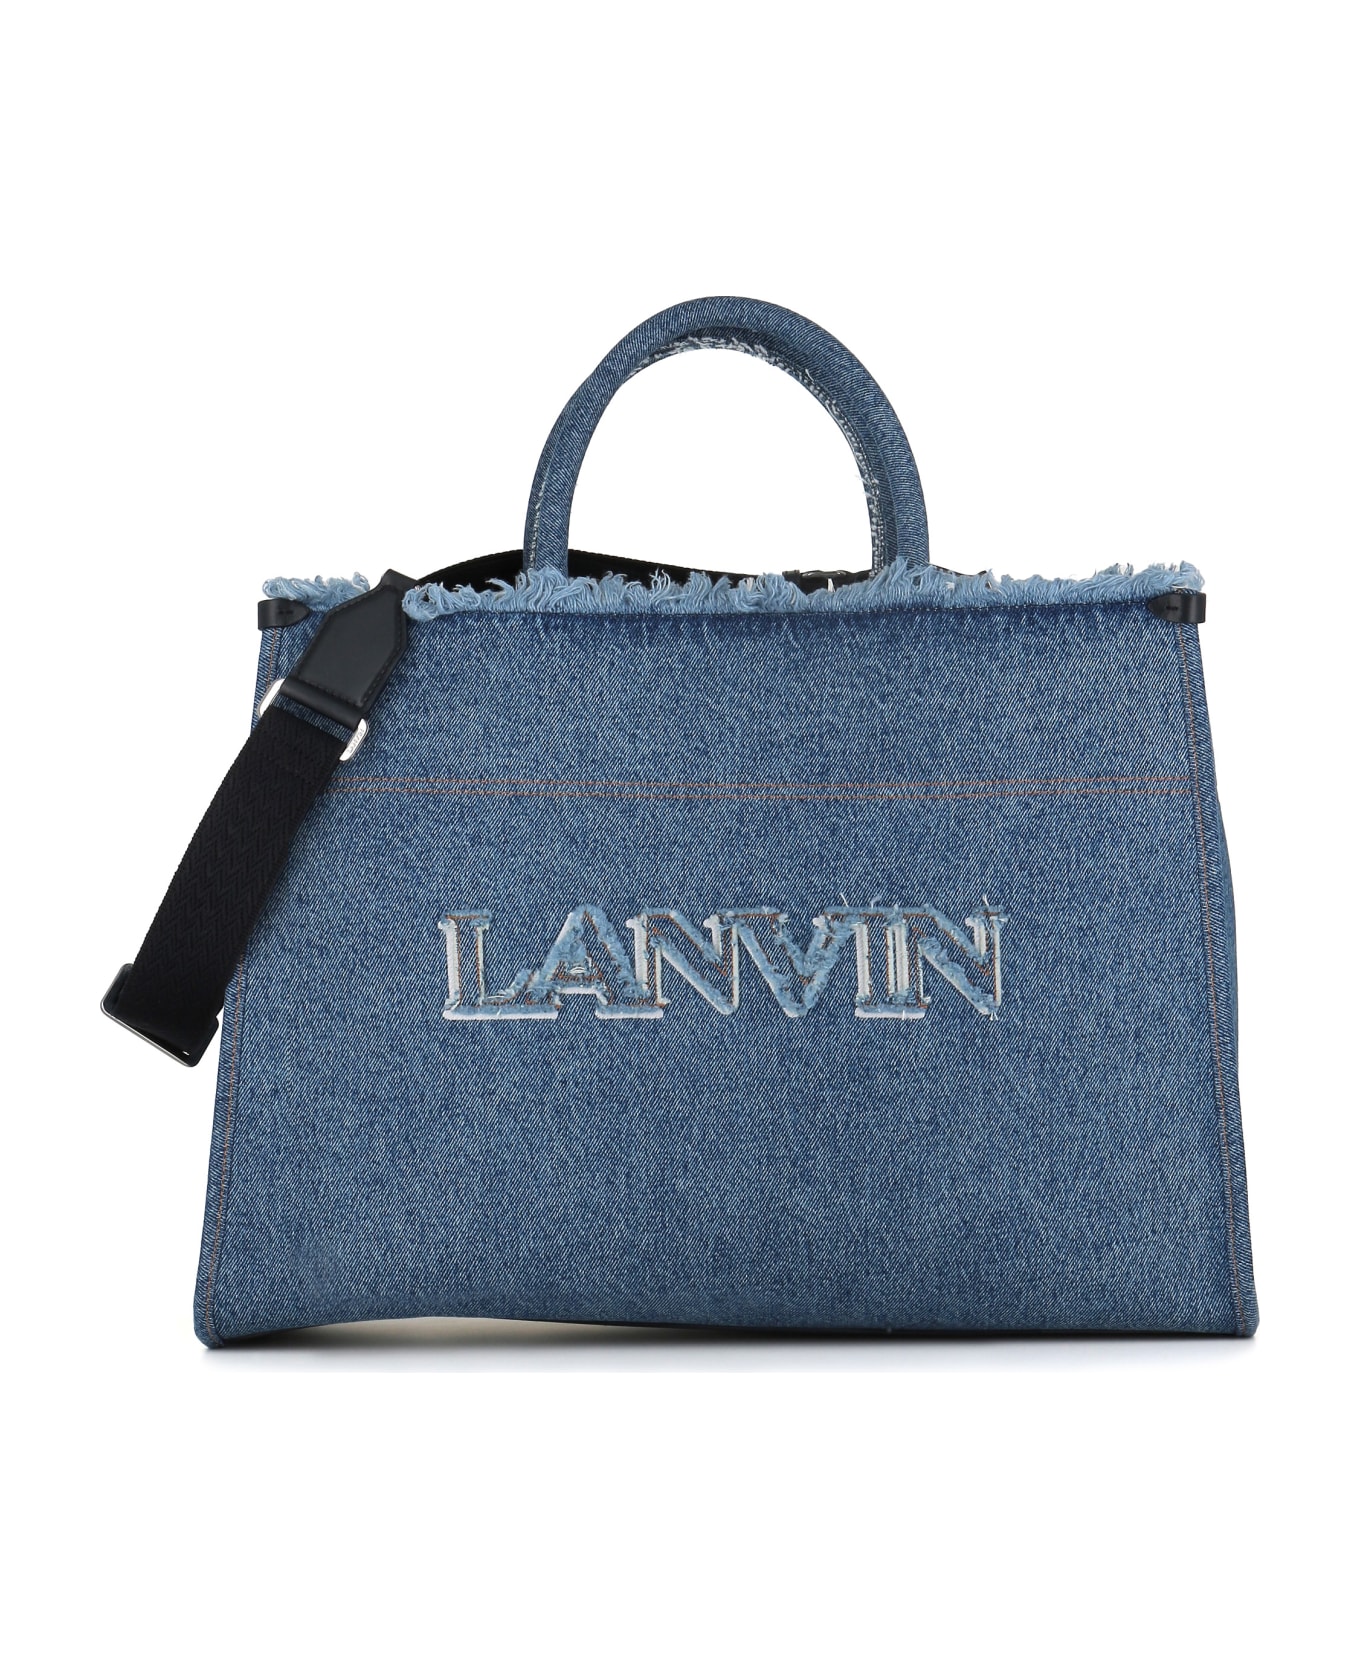 Lanvin In&out Mm Tote Bag - Blue